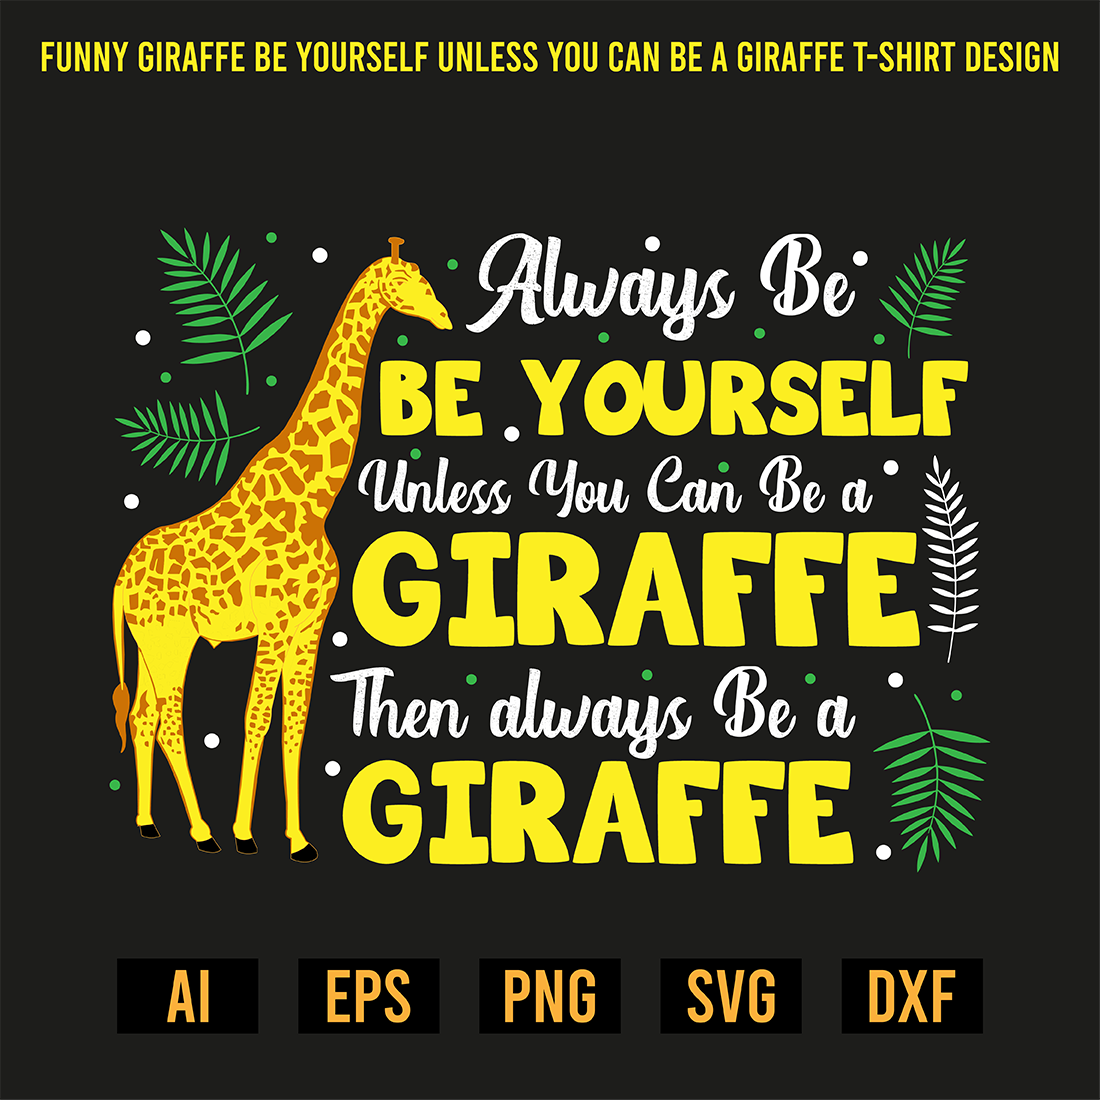 Funny Giraffe Be Yourself Unless You Can Be a Giraffe T-Shirt Design preview image.